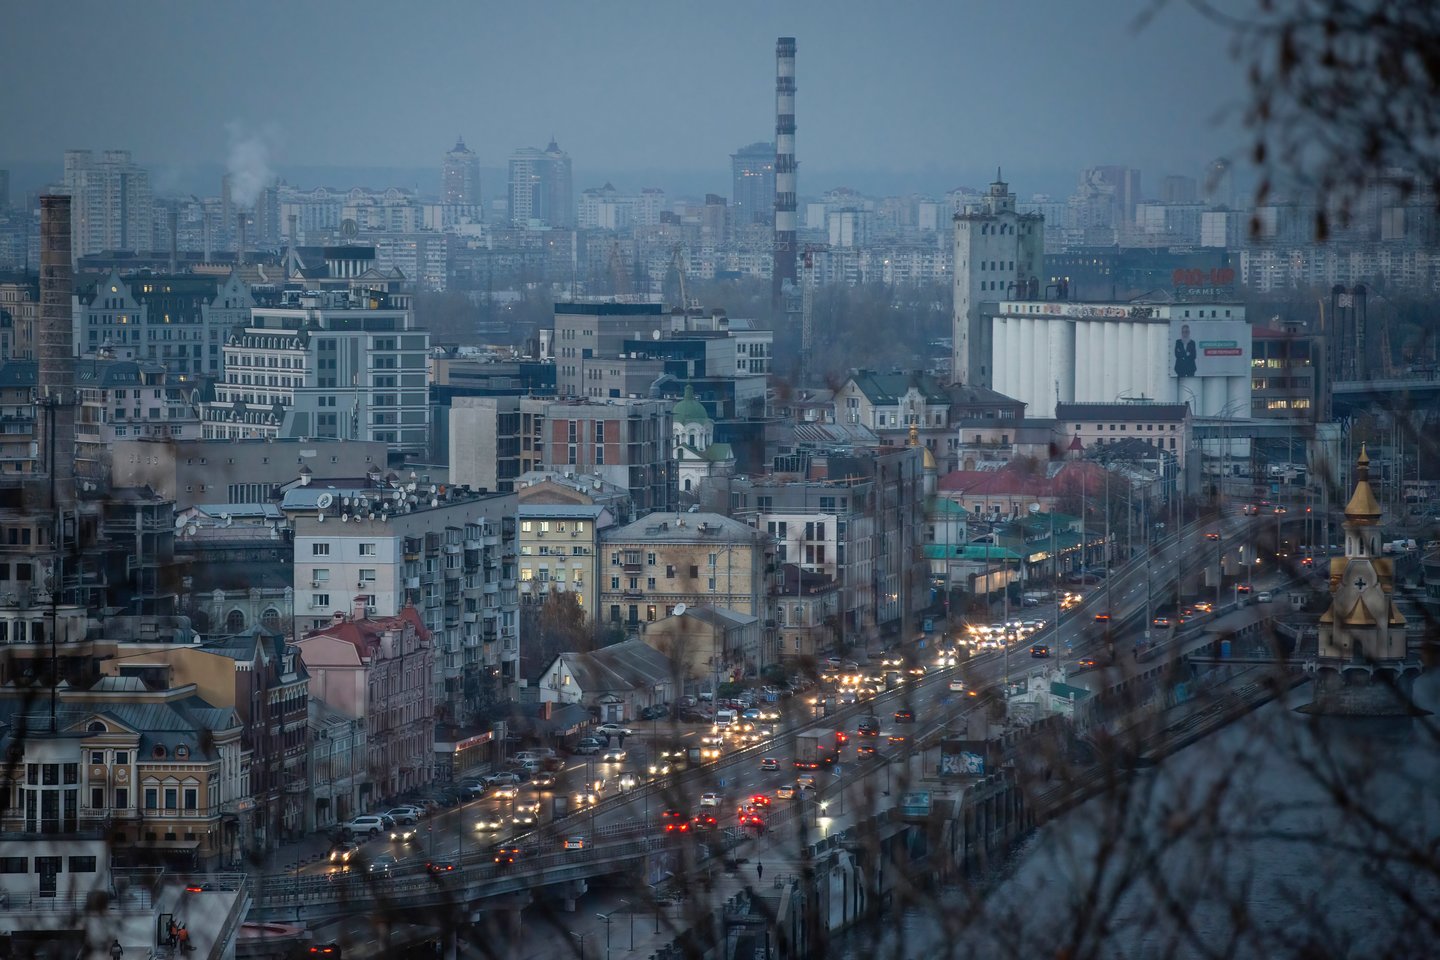  November 7, 2022, Kyiv, Ukraine: Central Kyiv without electricity after critical civil infrastructure was hit by Russian missile attacks in Ukraine. Kyiv authorities are planning to evacuate three million residents if the Ukrainian capital suffers a complete blackout.<br> Zuma Press / Scanpix